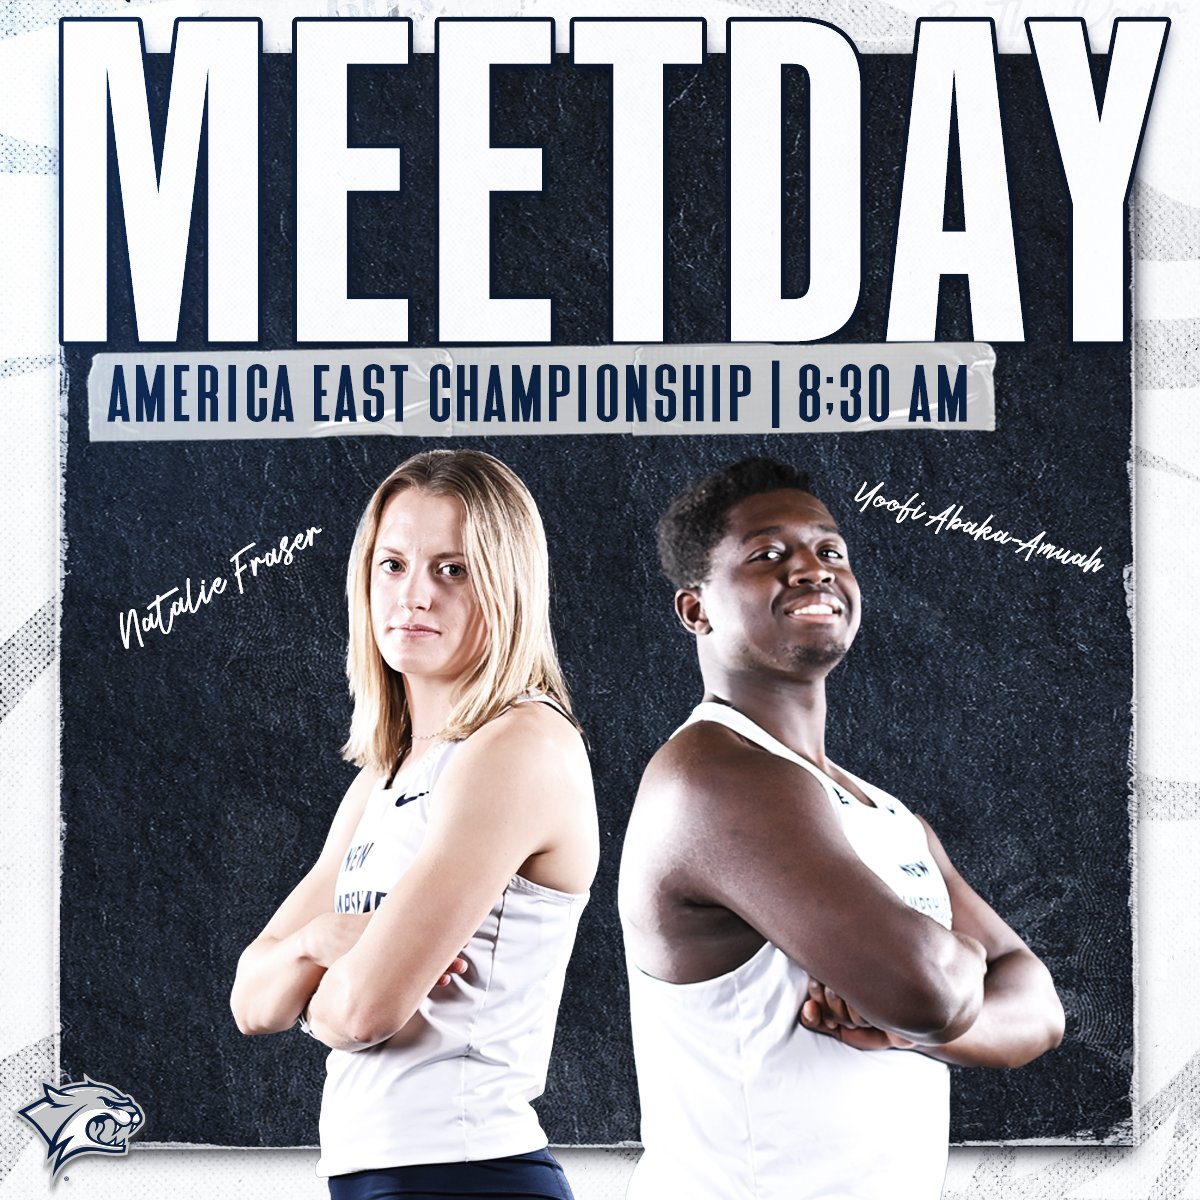 Day two of the America East Outdoor Championships is here!

Women's Meet Day Central ➡️ tinyurl.com/37tjj66uMen's 
Meet Day Central ➡️ tinyurl.com/5n8yc3jj 

#BeTheRoar